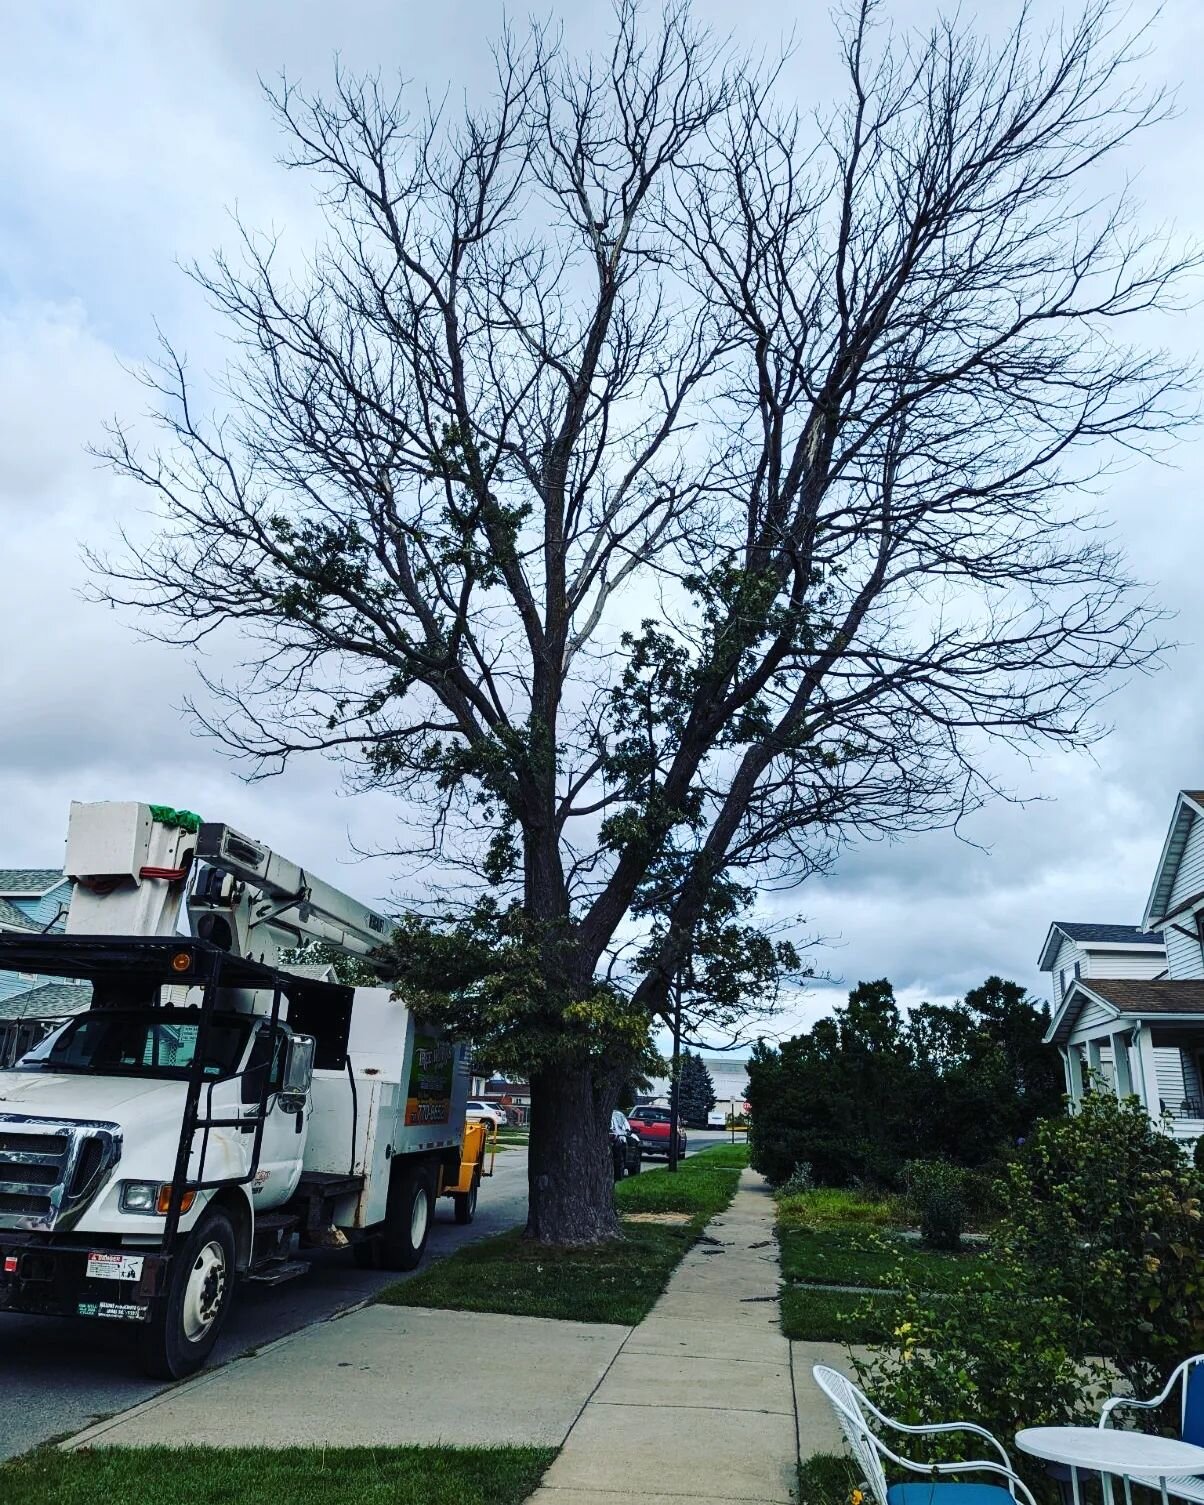 Before🌳 and after pictures 👏

#treeremoval 
#treeworks 
#stumpgrinding